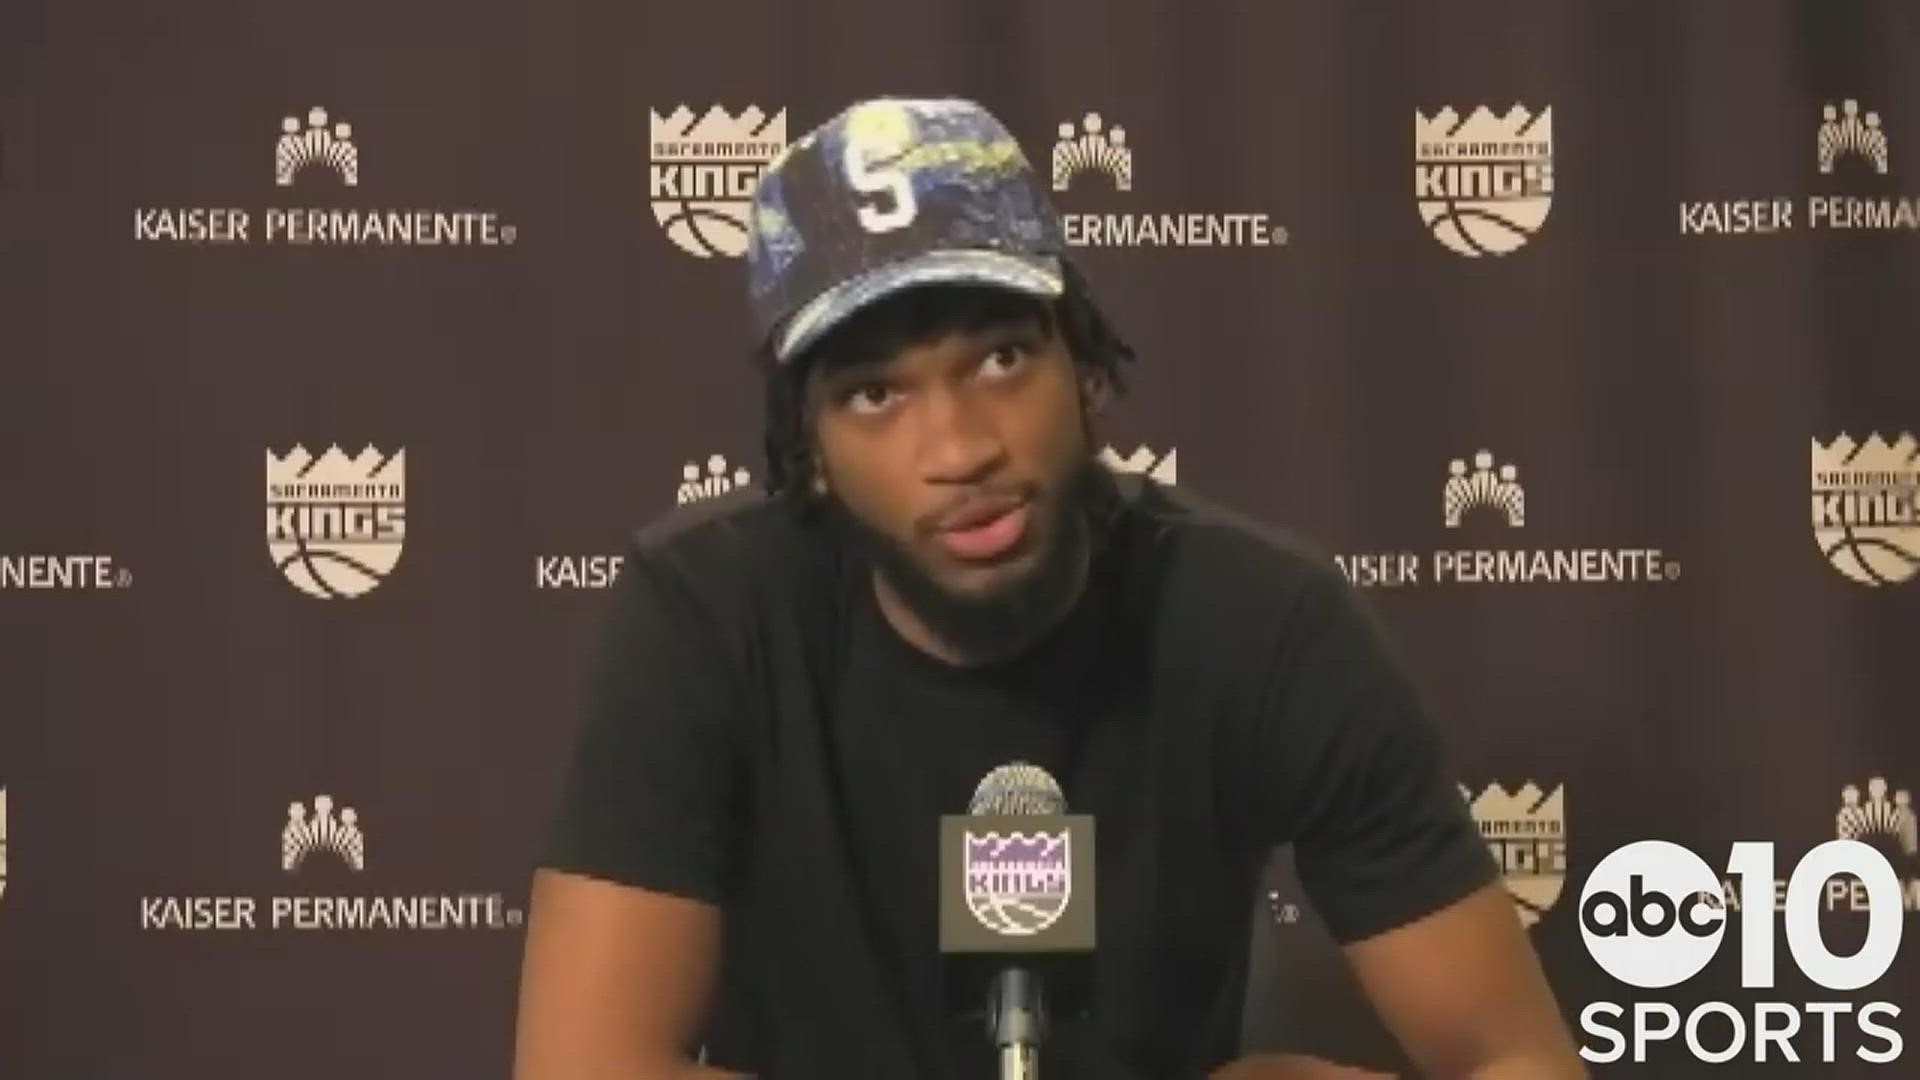 The day after the season ended, Kings F/C Marvin Bagley III reflects on his third NBA year, details areas of improvement & trying to overcome his injury struggles.